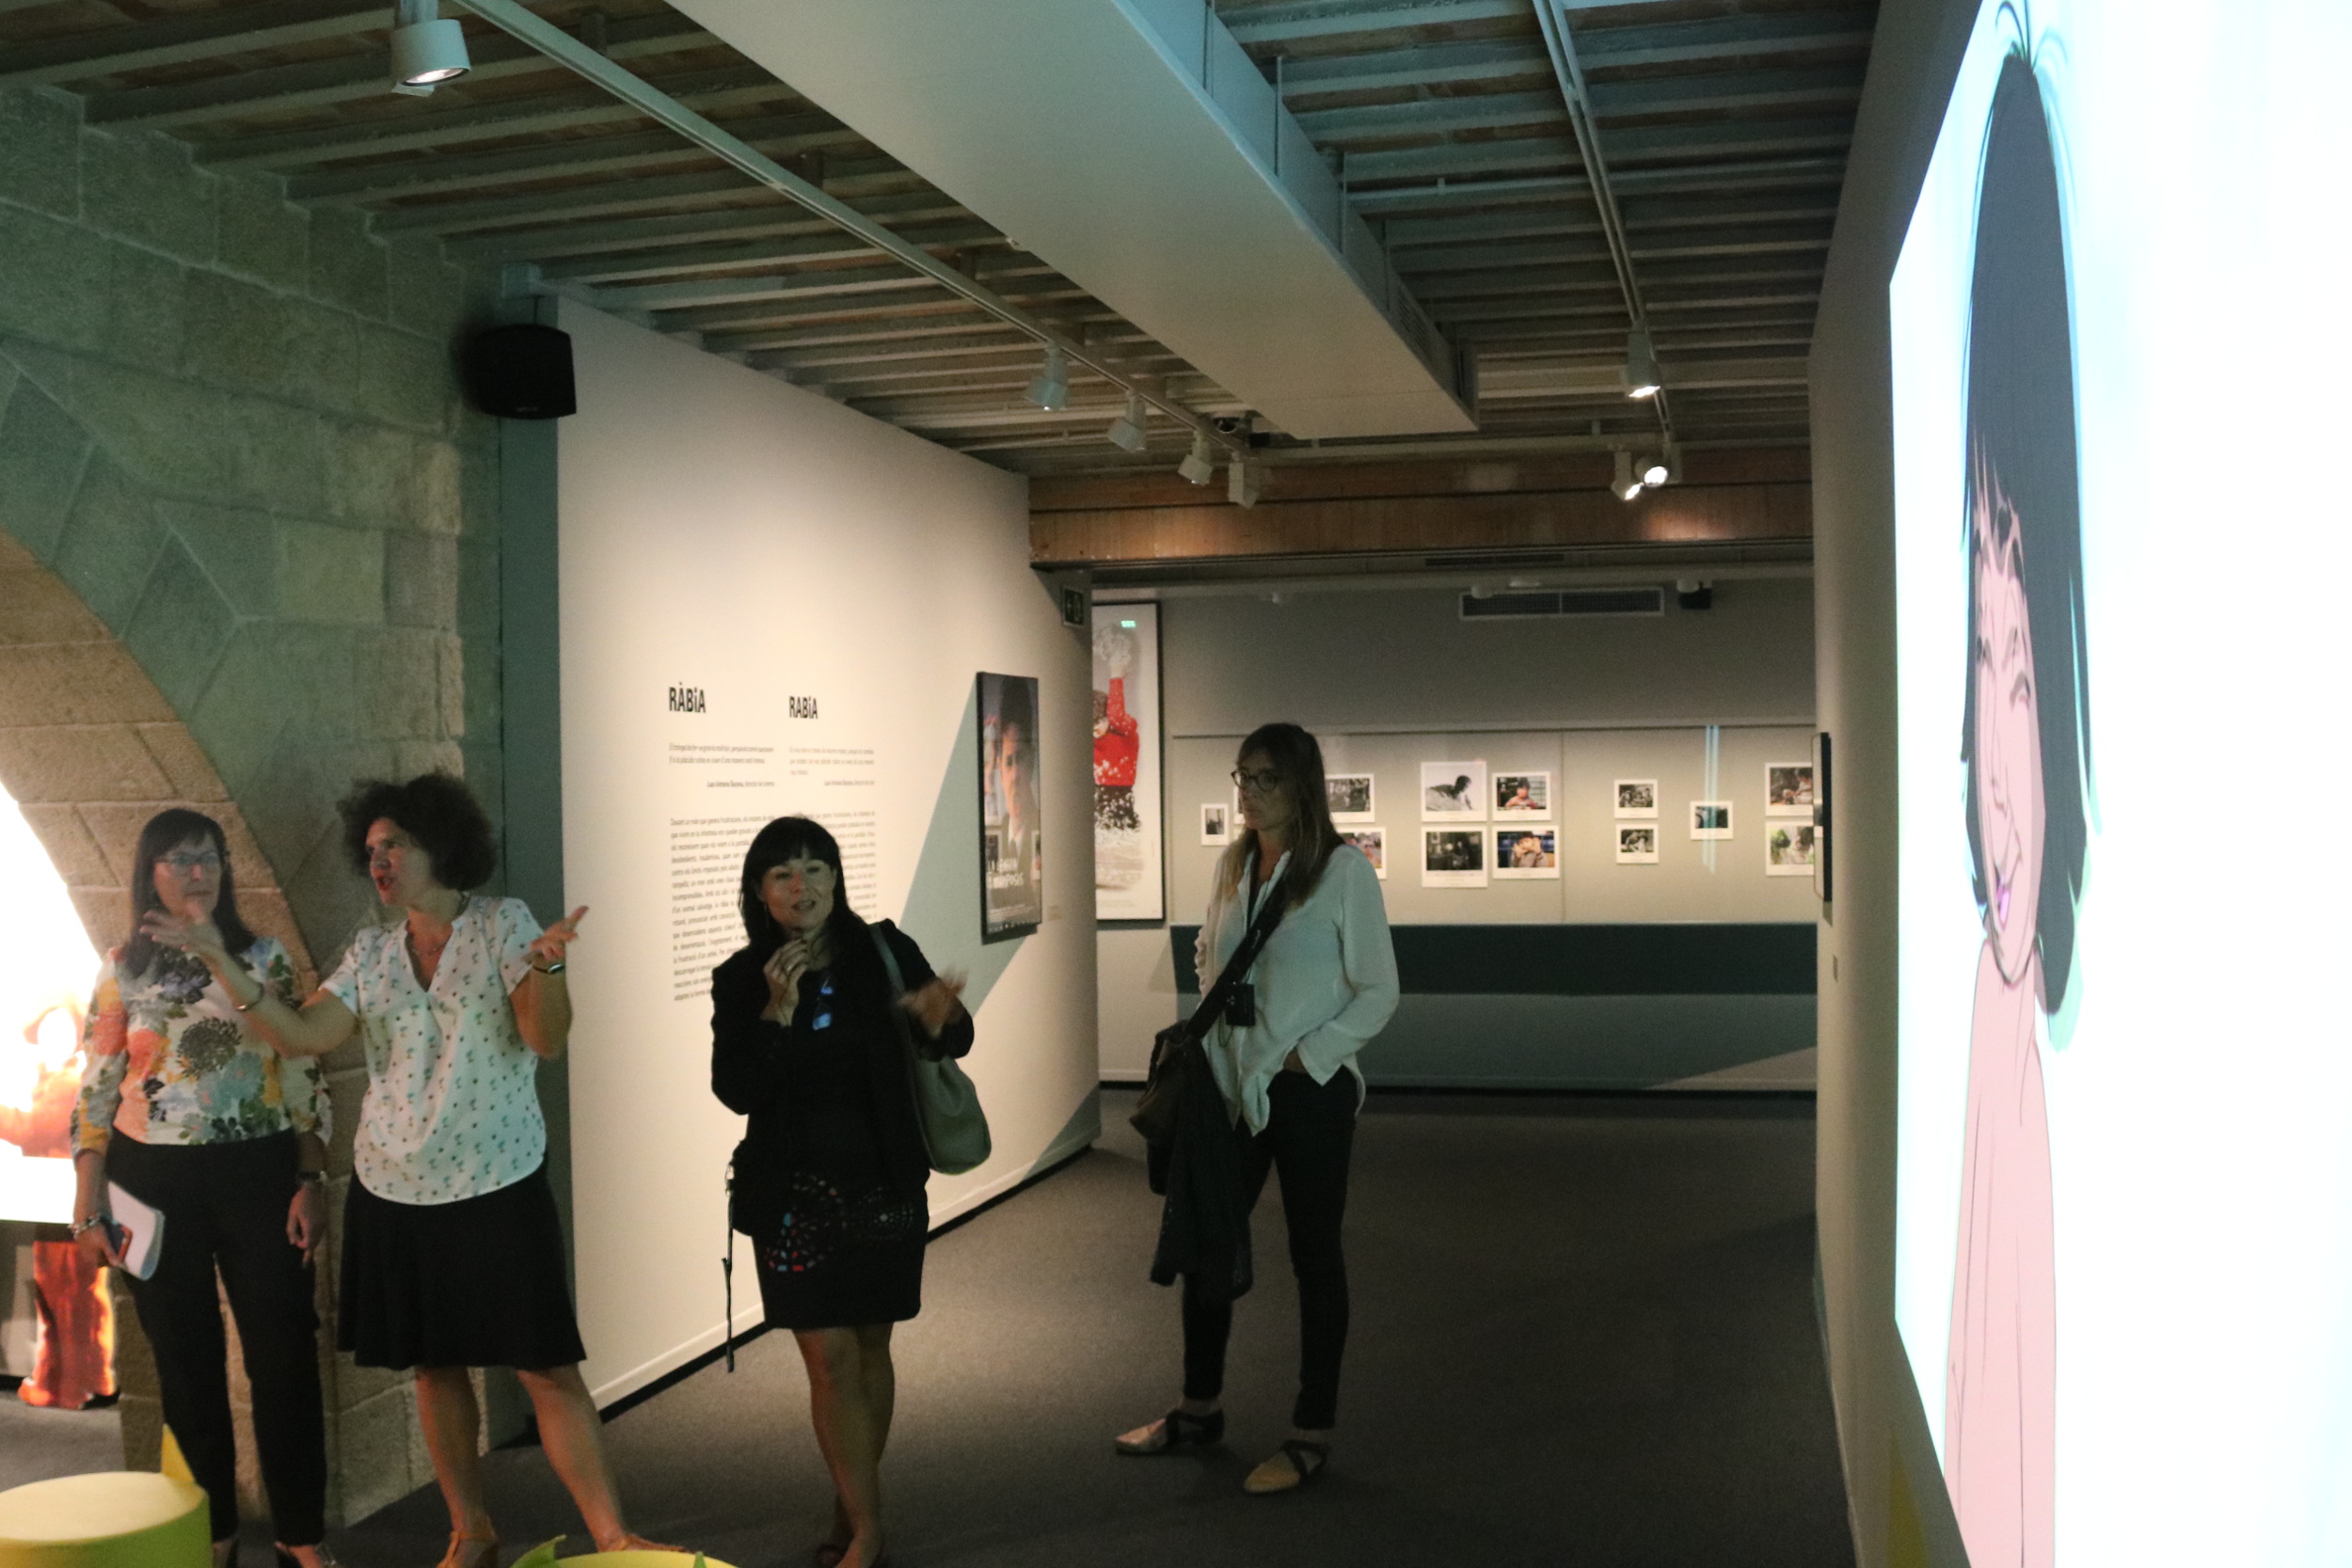 The 'Cinema and Emotions' exhibit at CaixaForum in Girona and some of its organizers (by ACN)